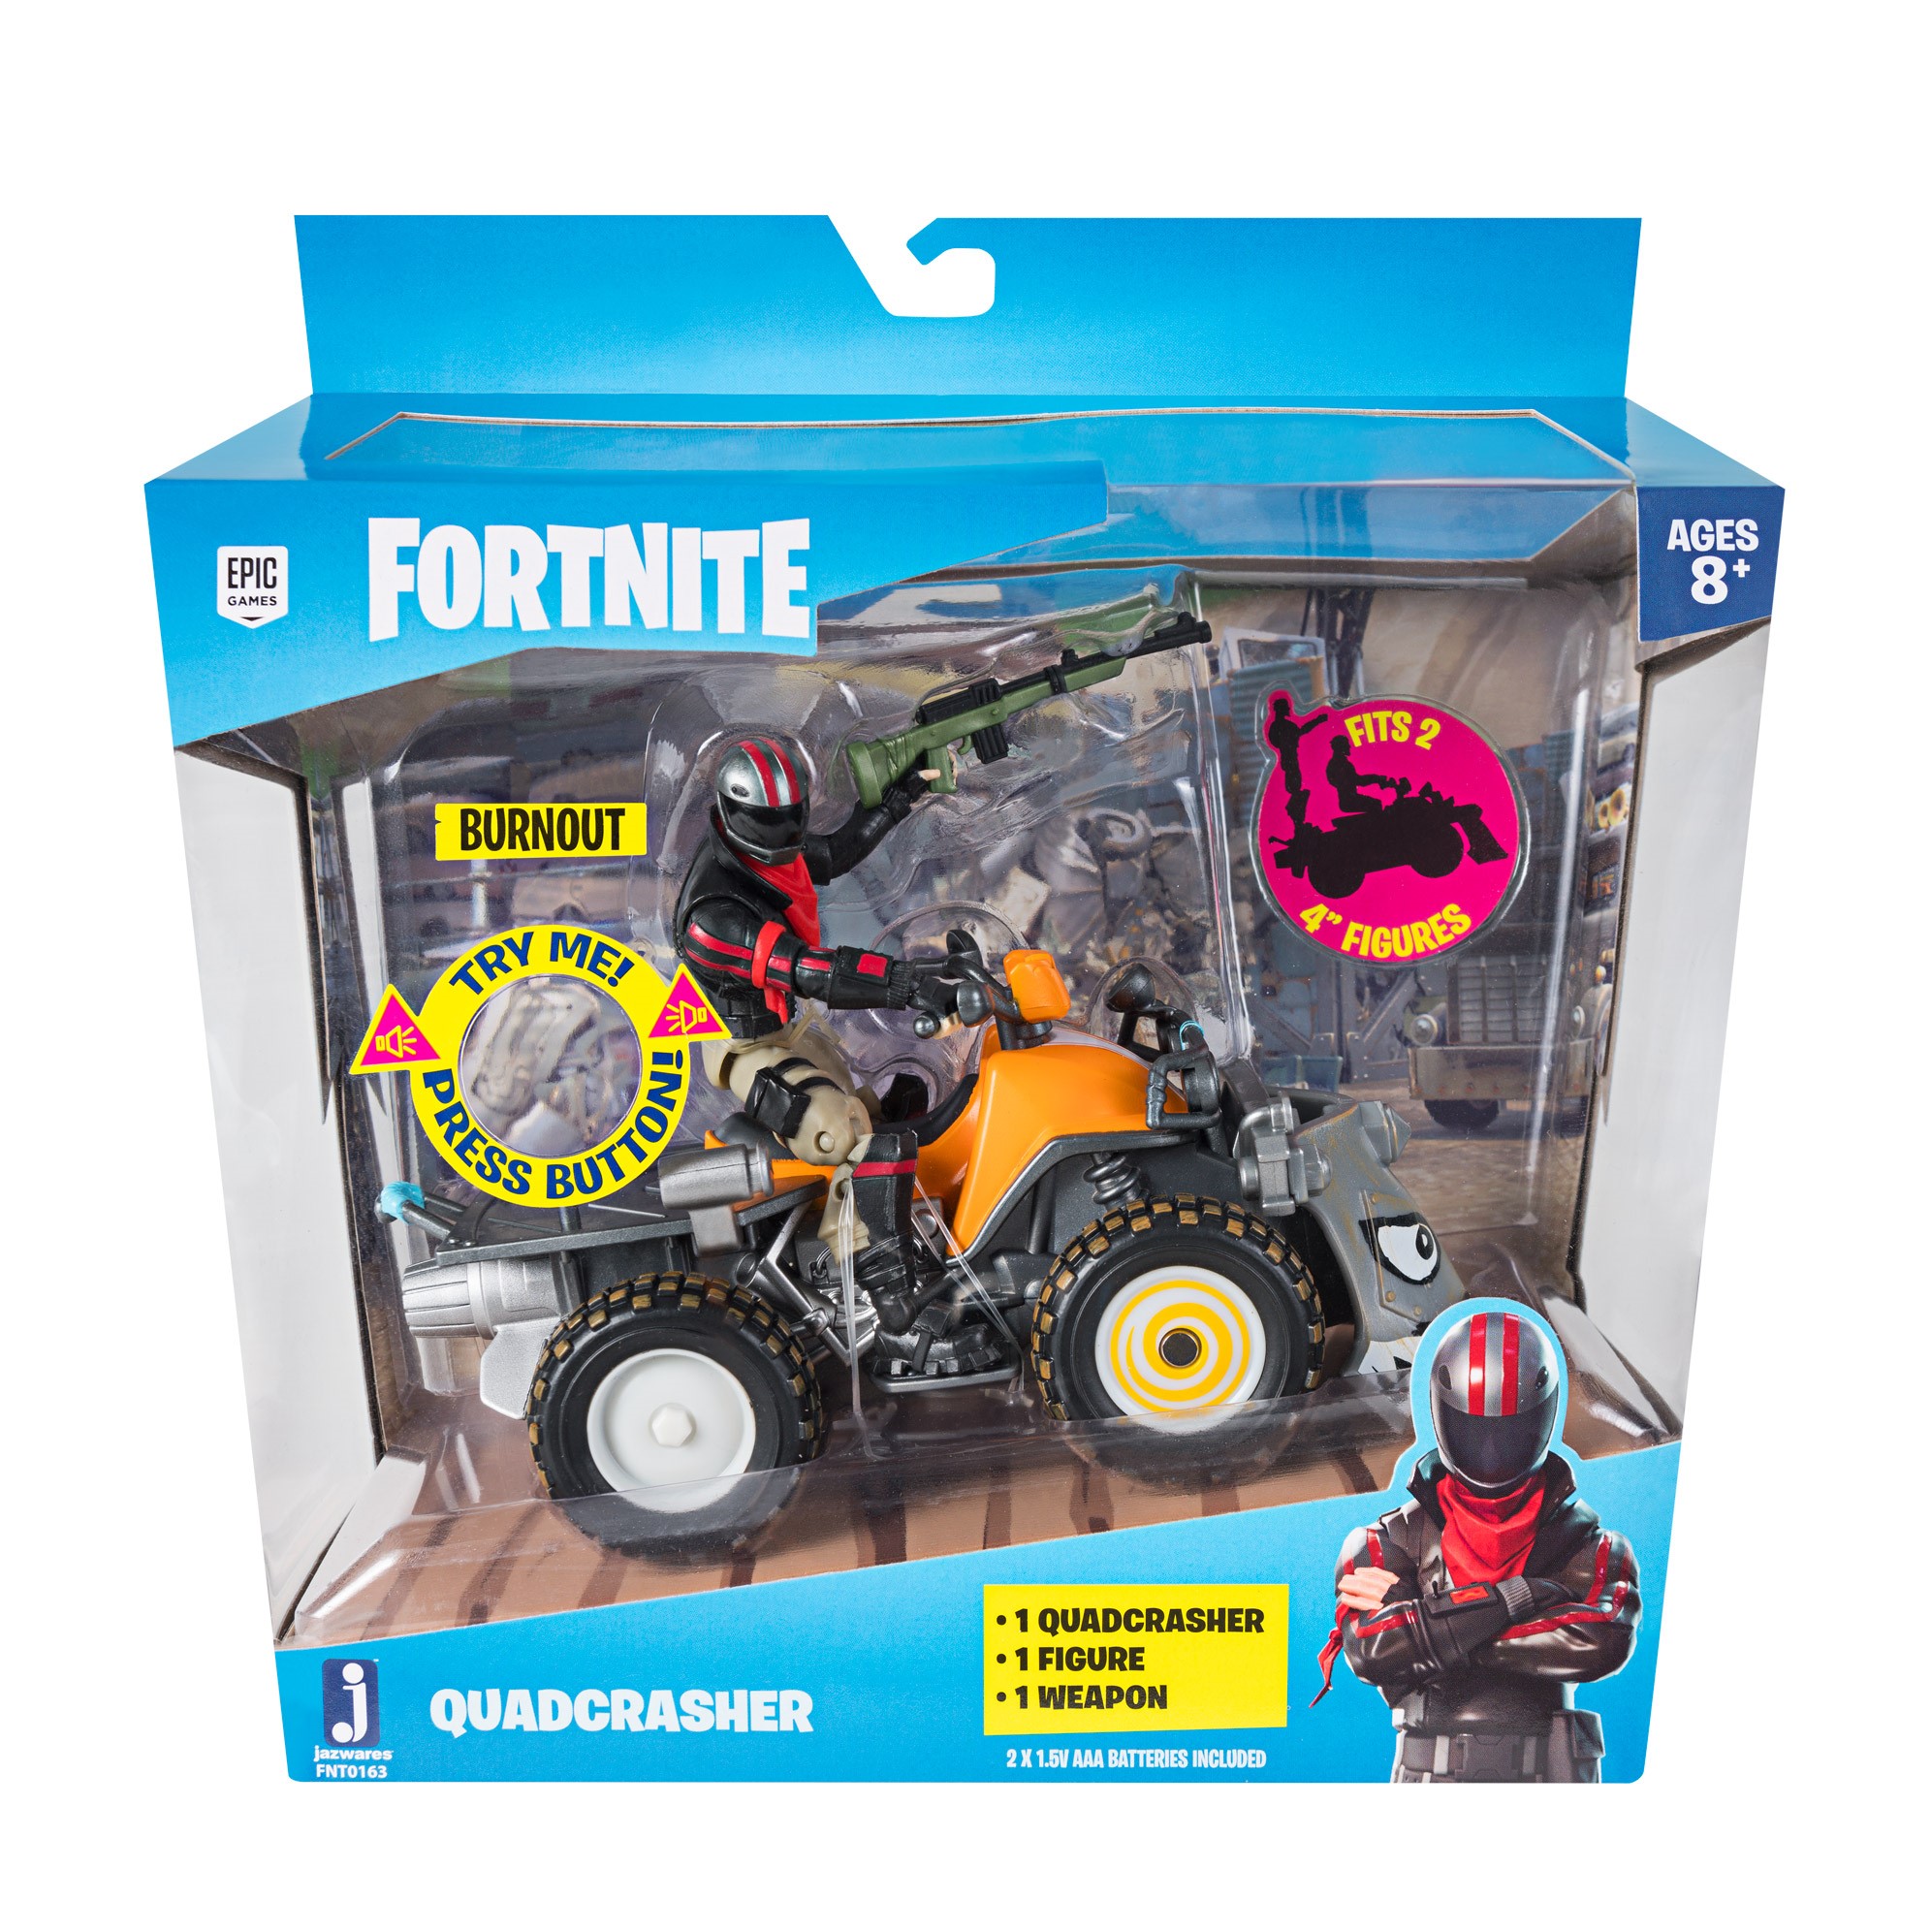 Fortnite Quadcrasher Vehicle with Burnout 4-inch Action Figure Included - image 5 of 13